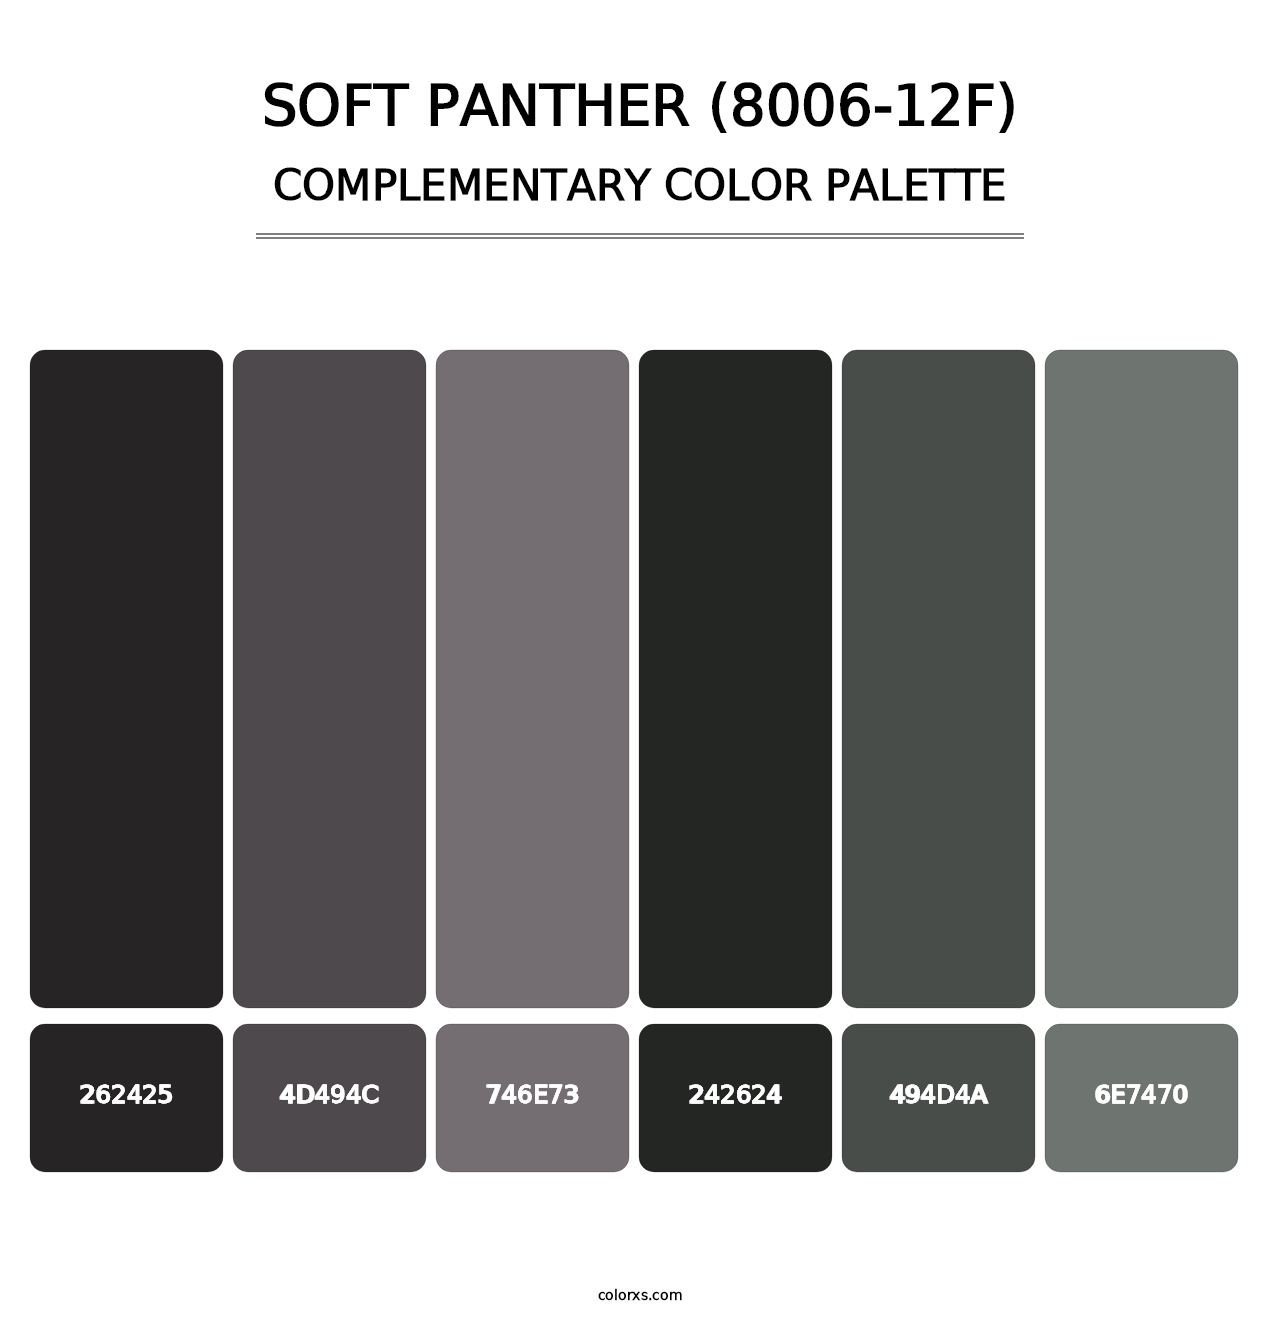 Soft Panther (8006-12F) - Complementary Color Palette